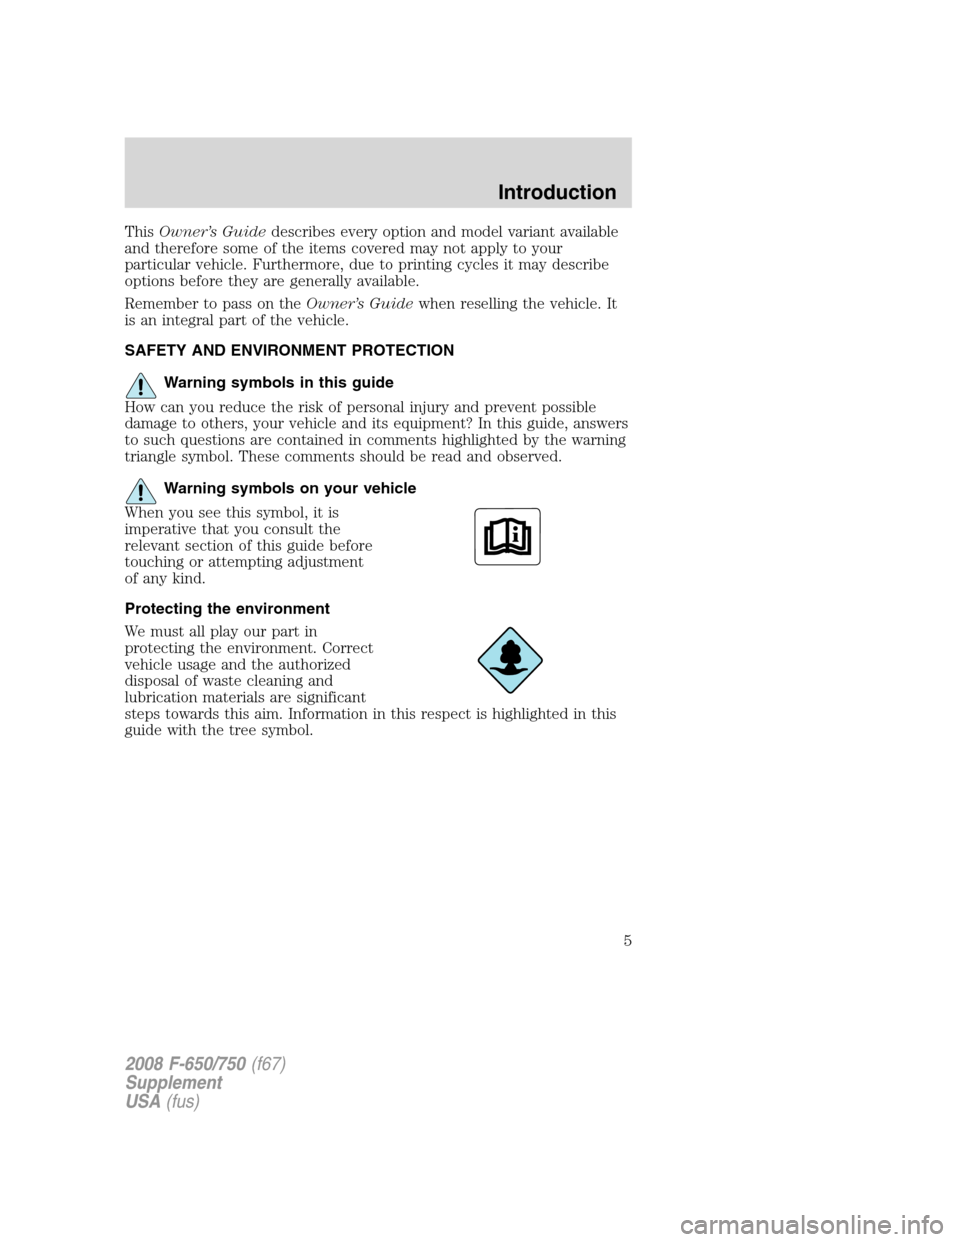 FORD F650 2008 11.G Owners Manual ThisOwner’s Guidedescribes every option and model variant available
and therefore some of the items covered may not apply to your
particular vehicle. Furthermore, due to printing cycles it may descr